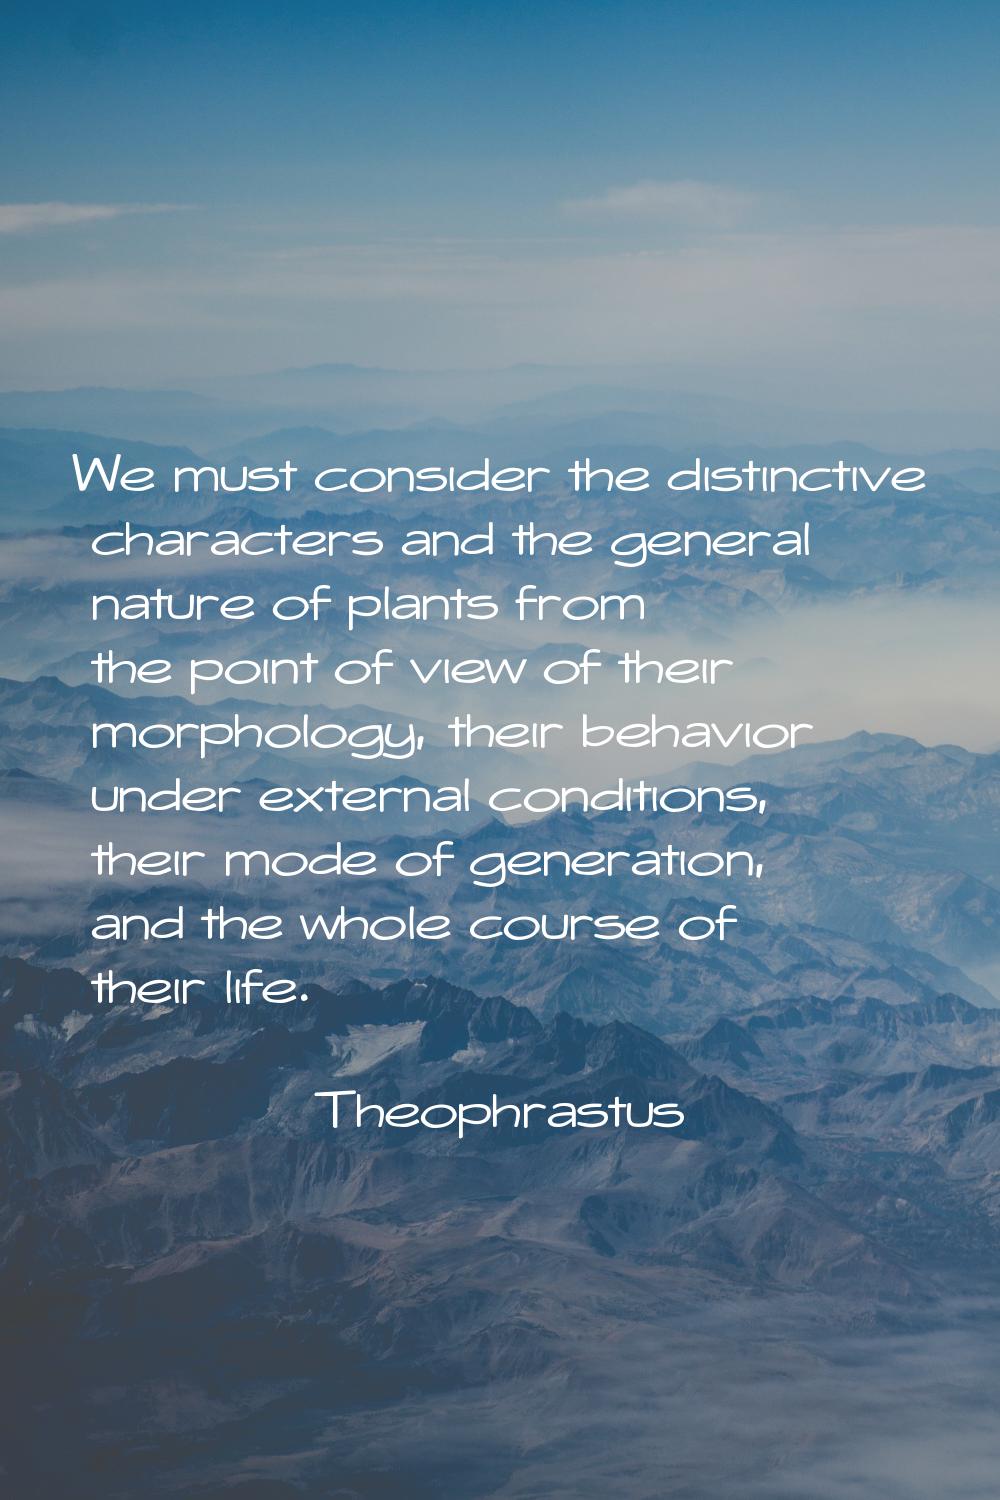 We must consider the distinctive characters and the general nature of plants from the point of view